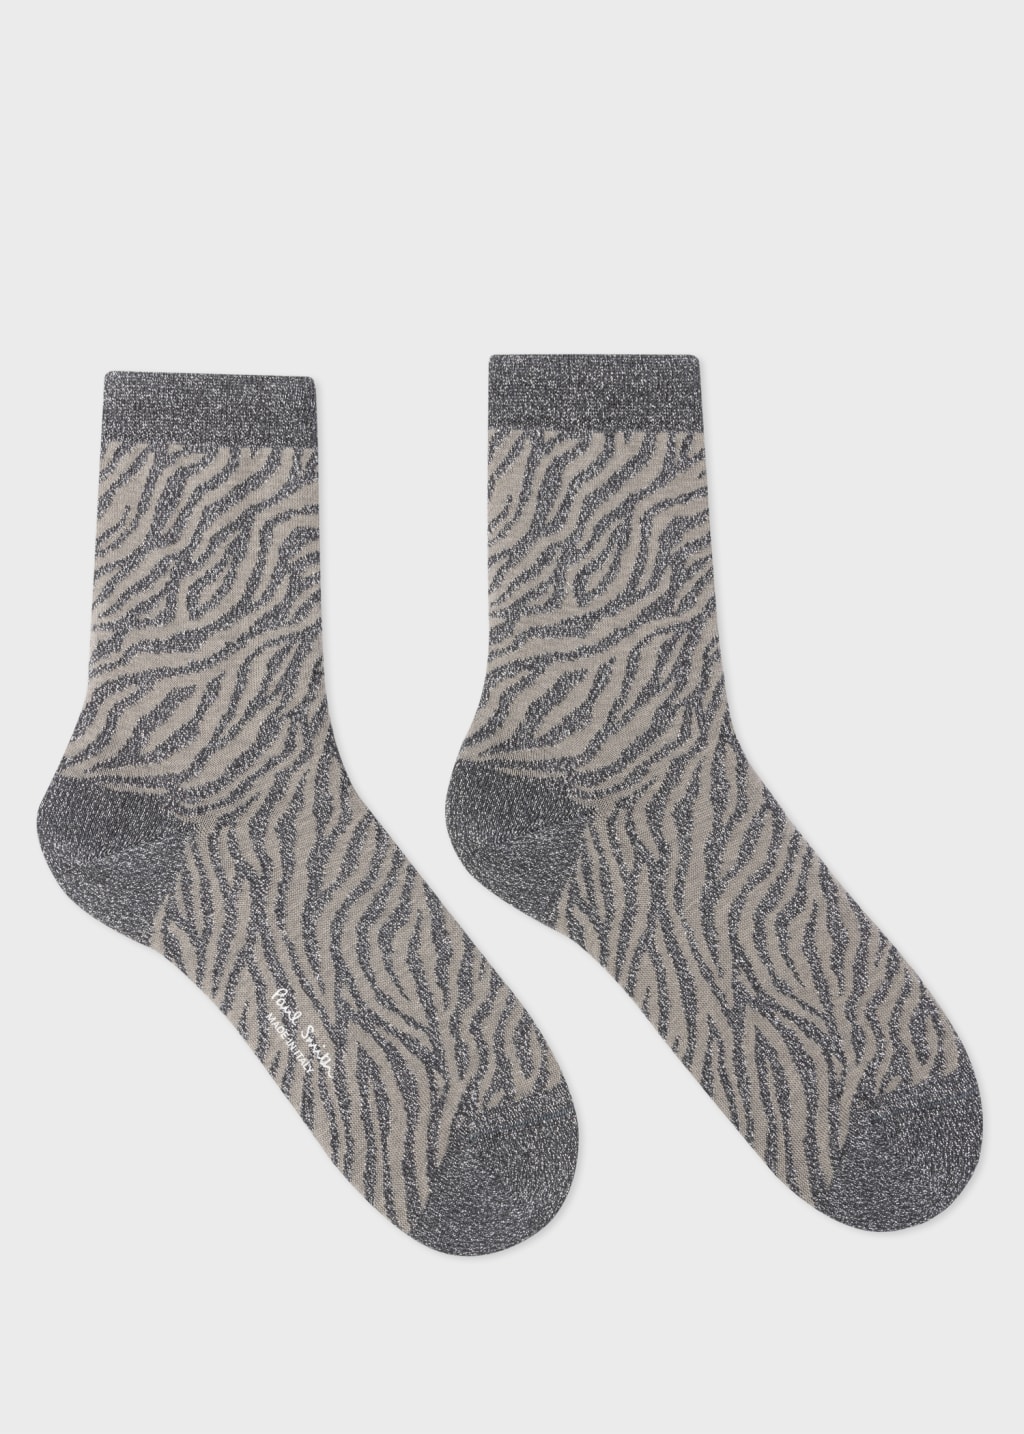 Product View - Women's Glitter Mixed Three Pack Socks by Paul Smith